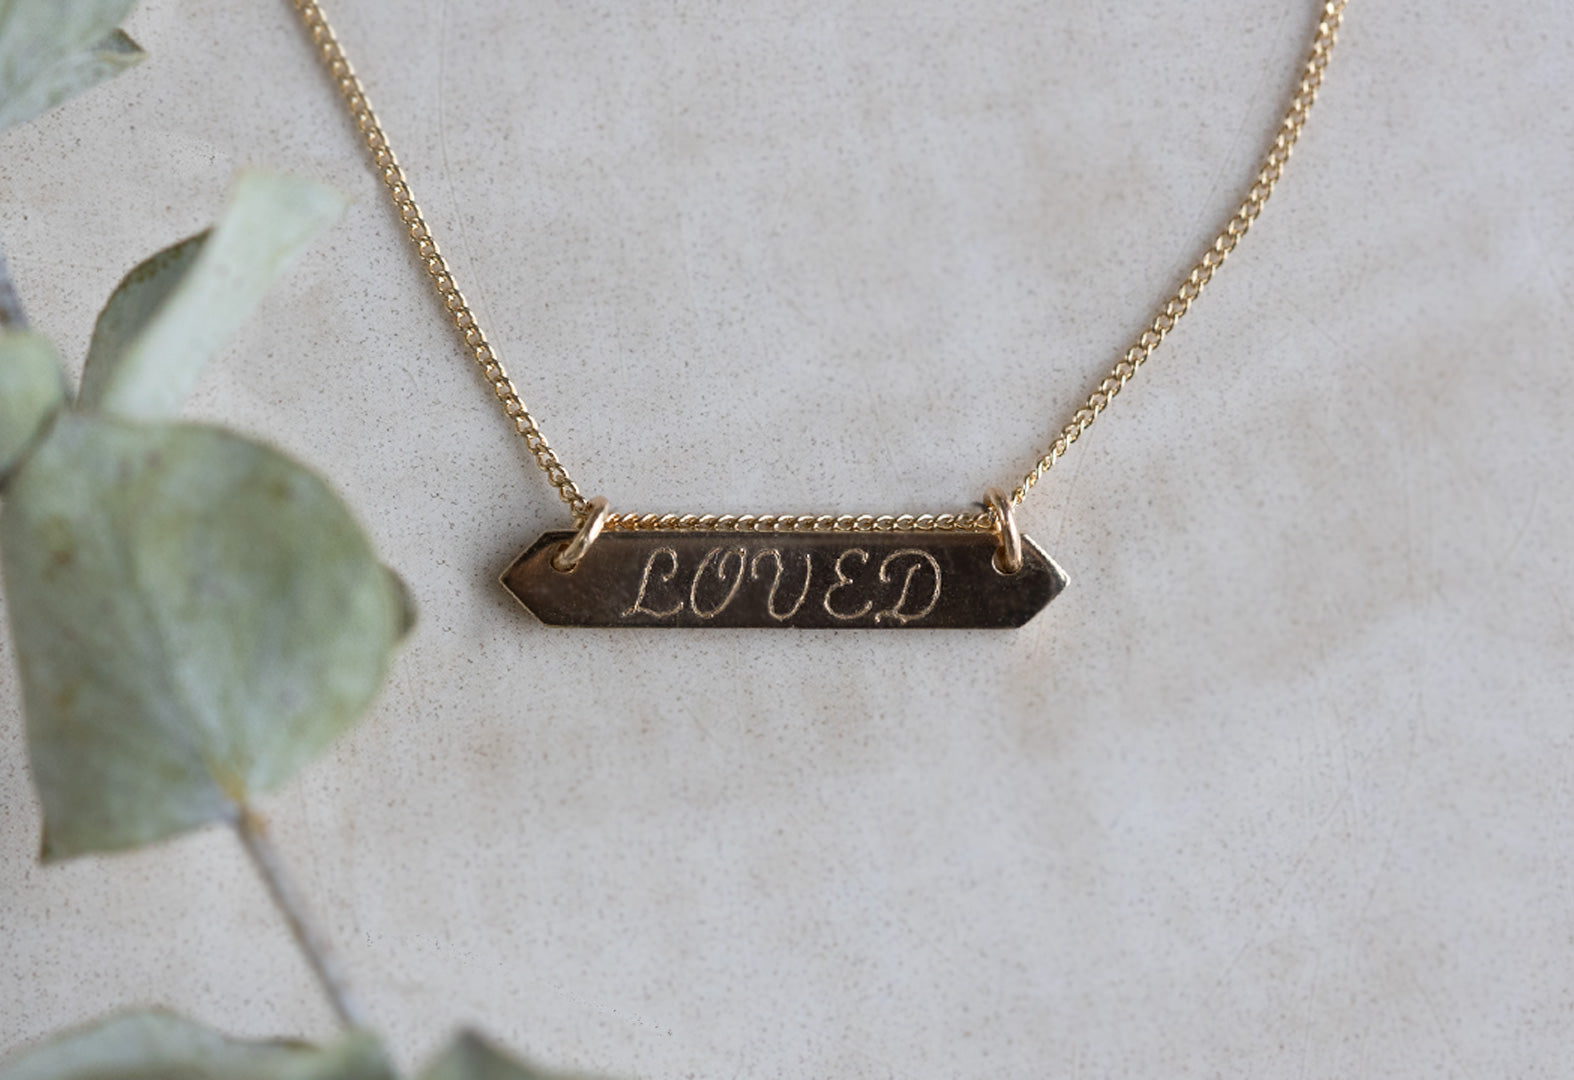 Personalized bar necklace with name, date or initial in Sterling Silver,  yellow Gold or Rose Gold.